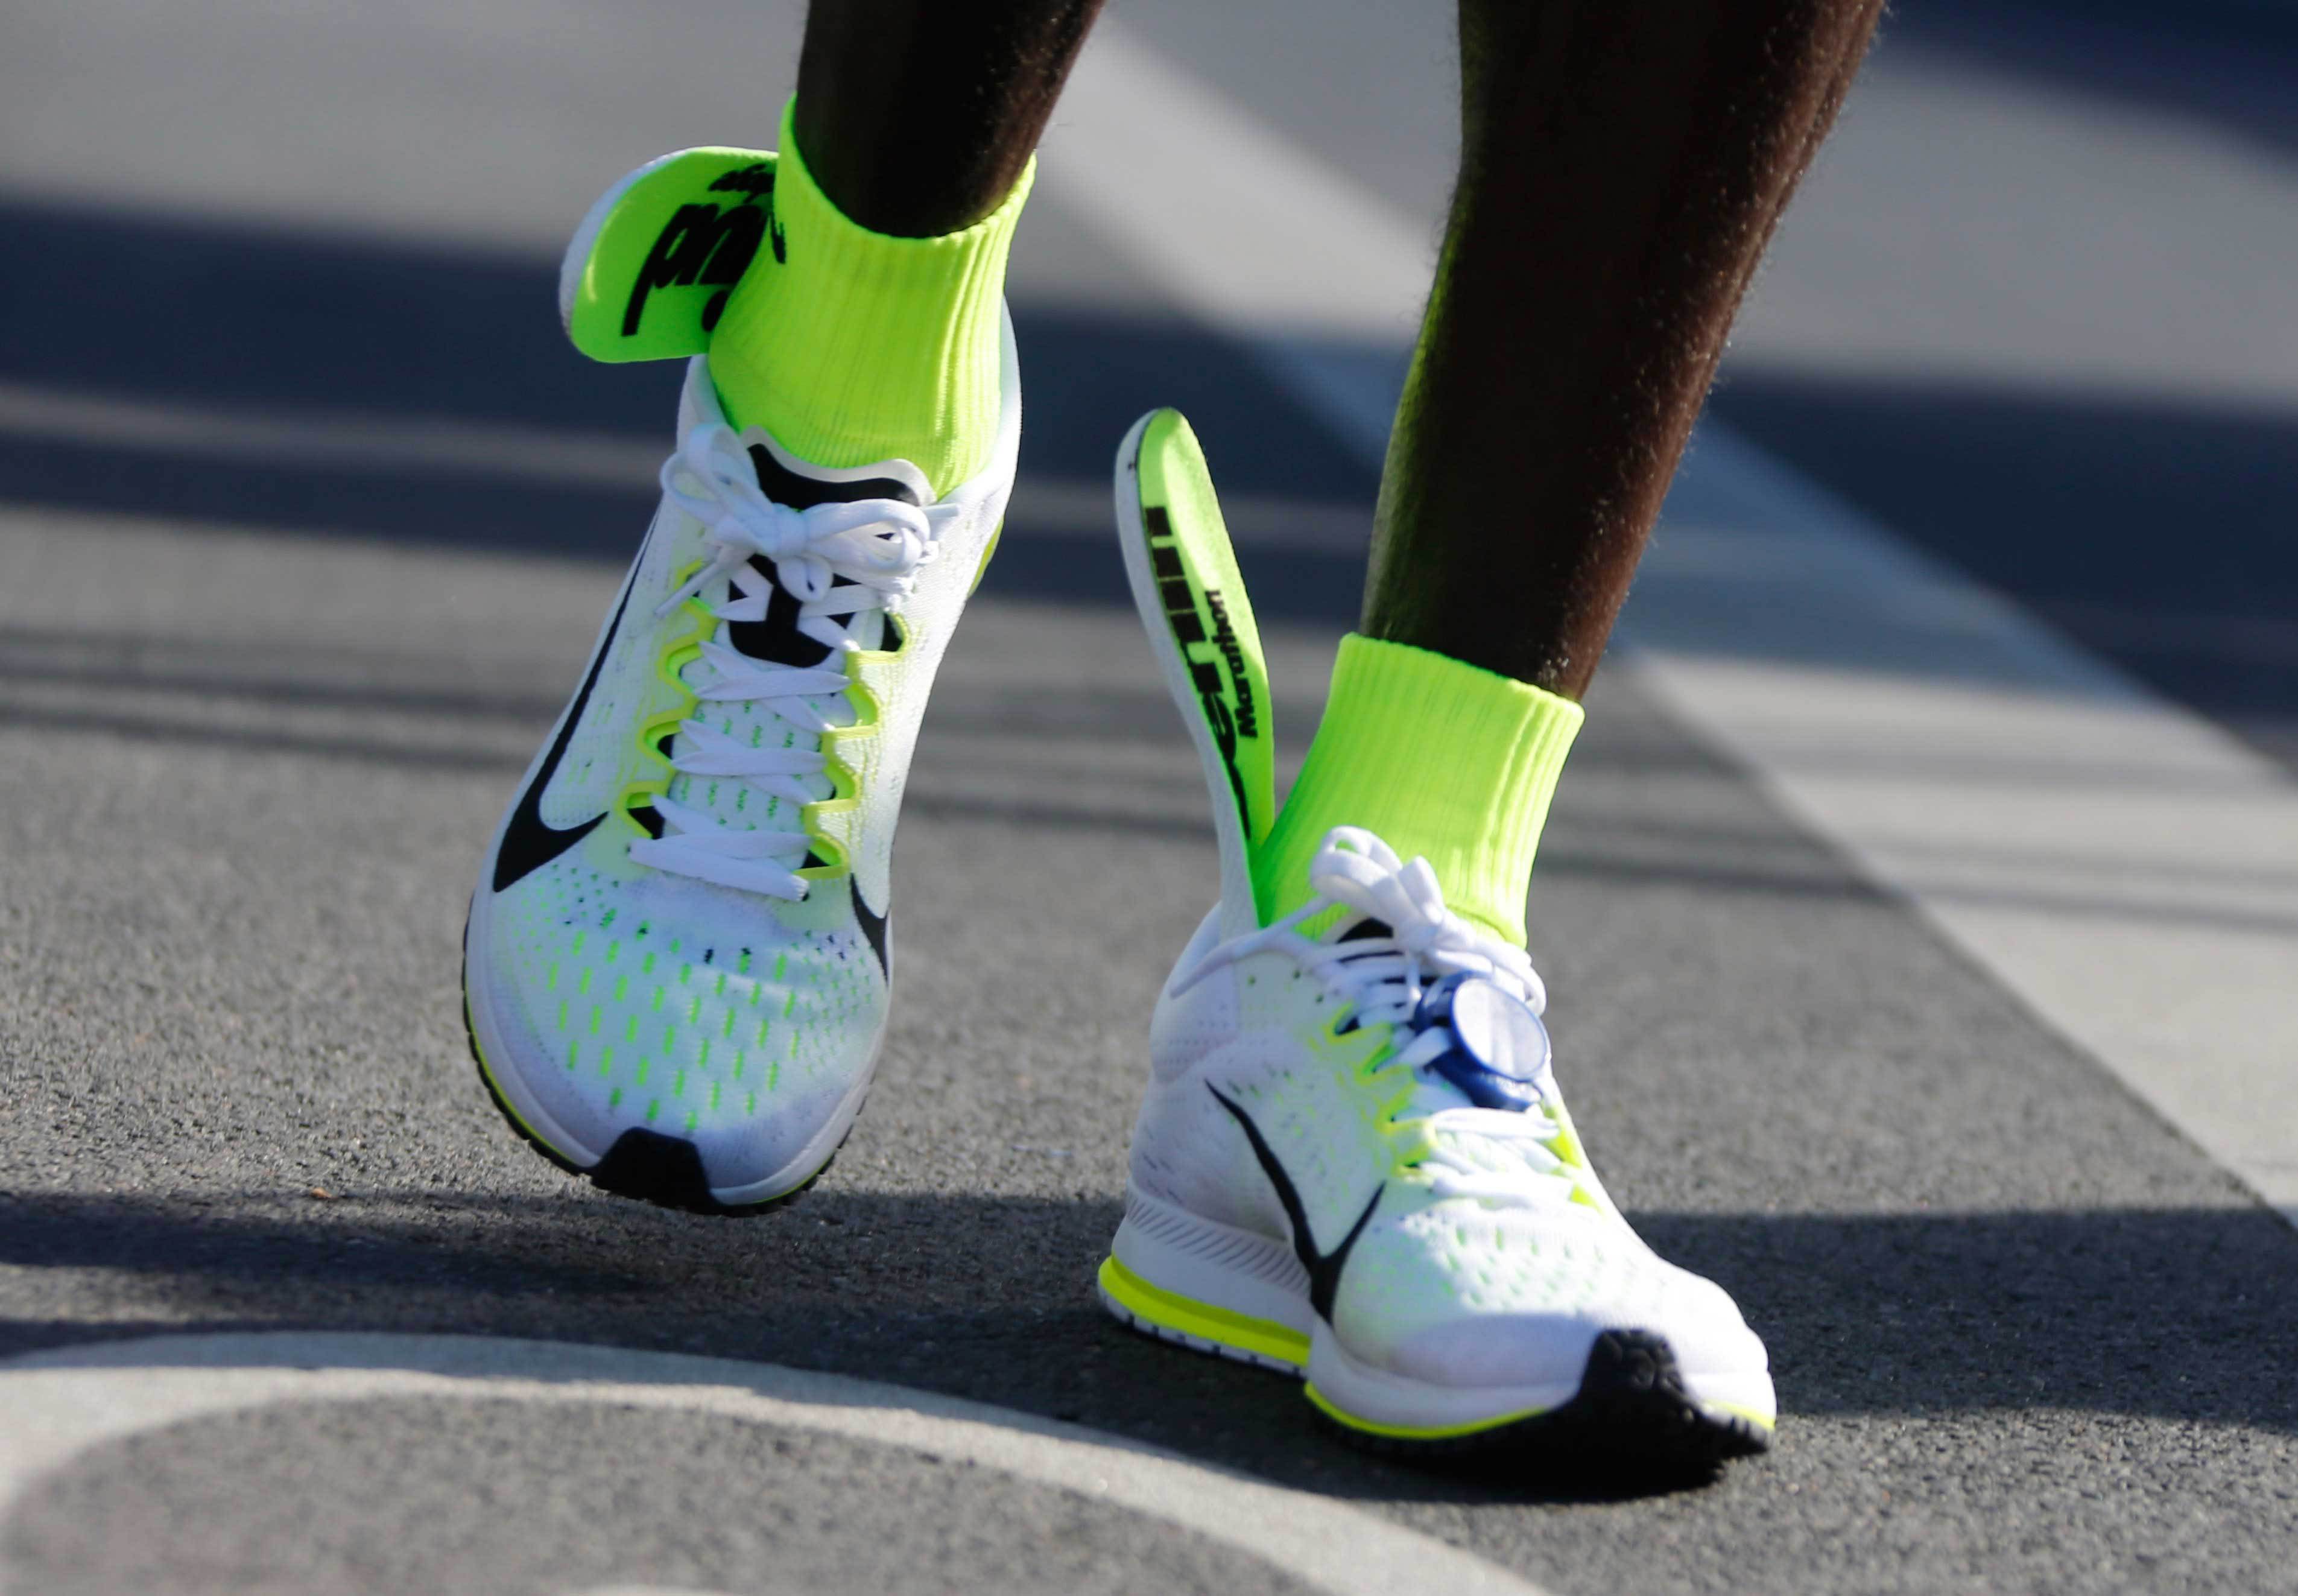 The insoles of Kenya's Kipchoge's running shoes are seen slipping up to his ankles after he crosses finish line to win the men's 42nd Berlin marathon